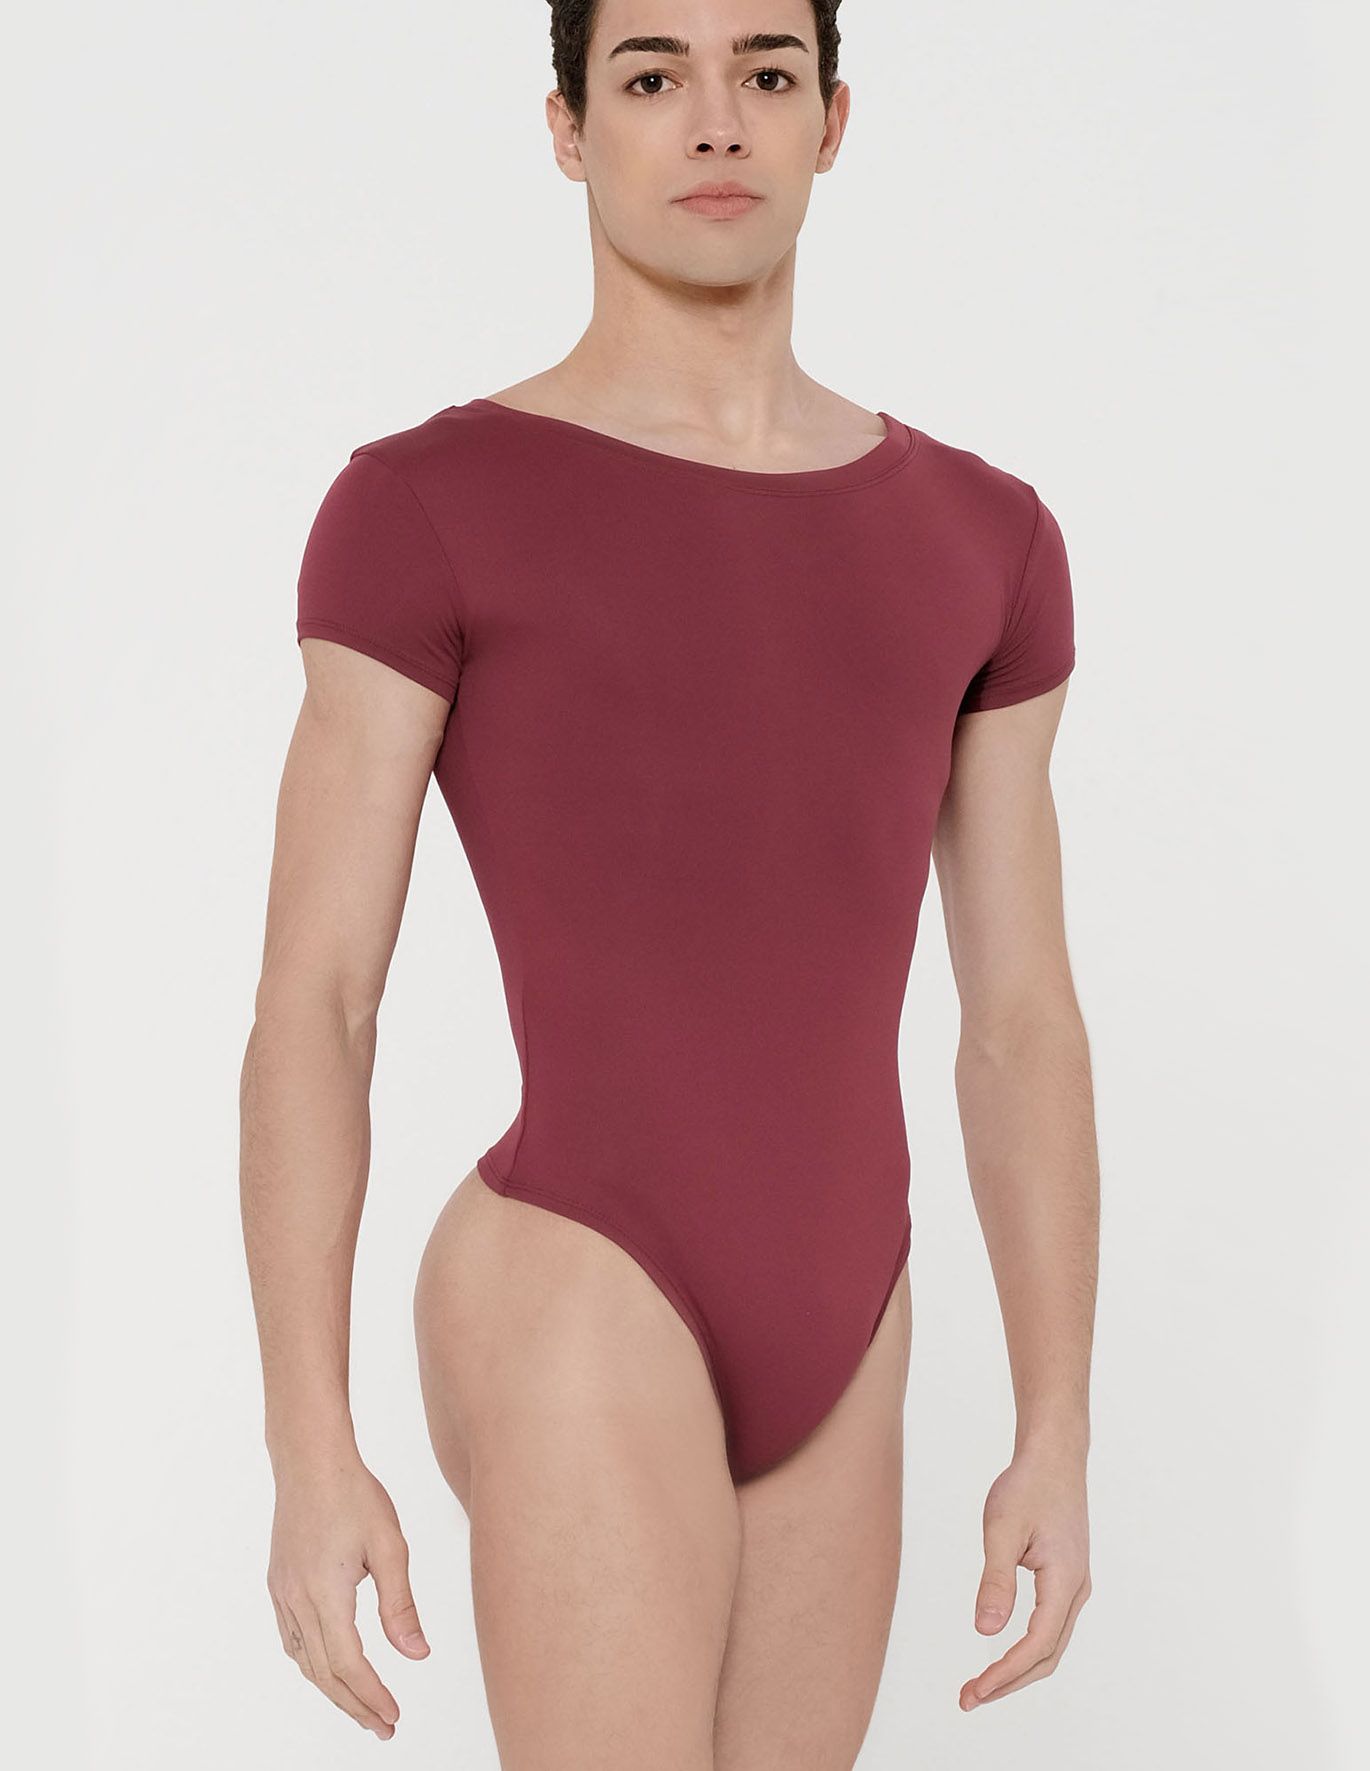 Wear Moi Lupin Mens and Boys Microfibre Leotard